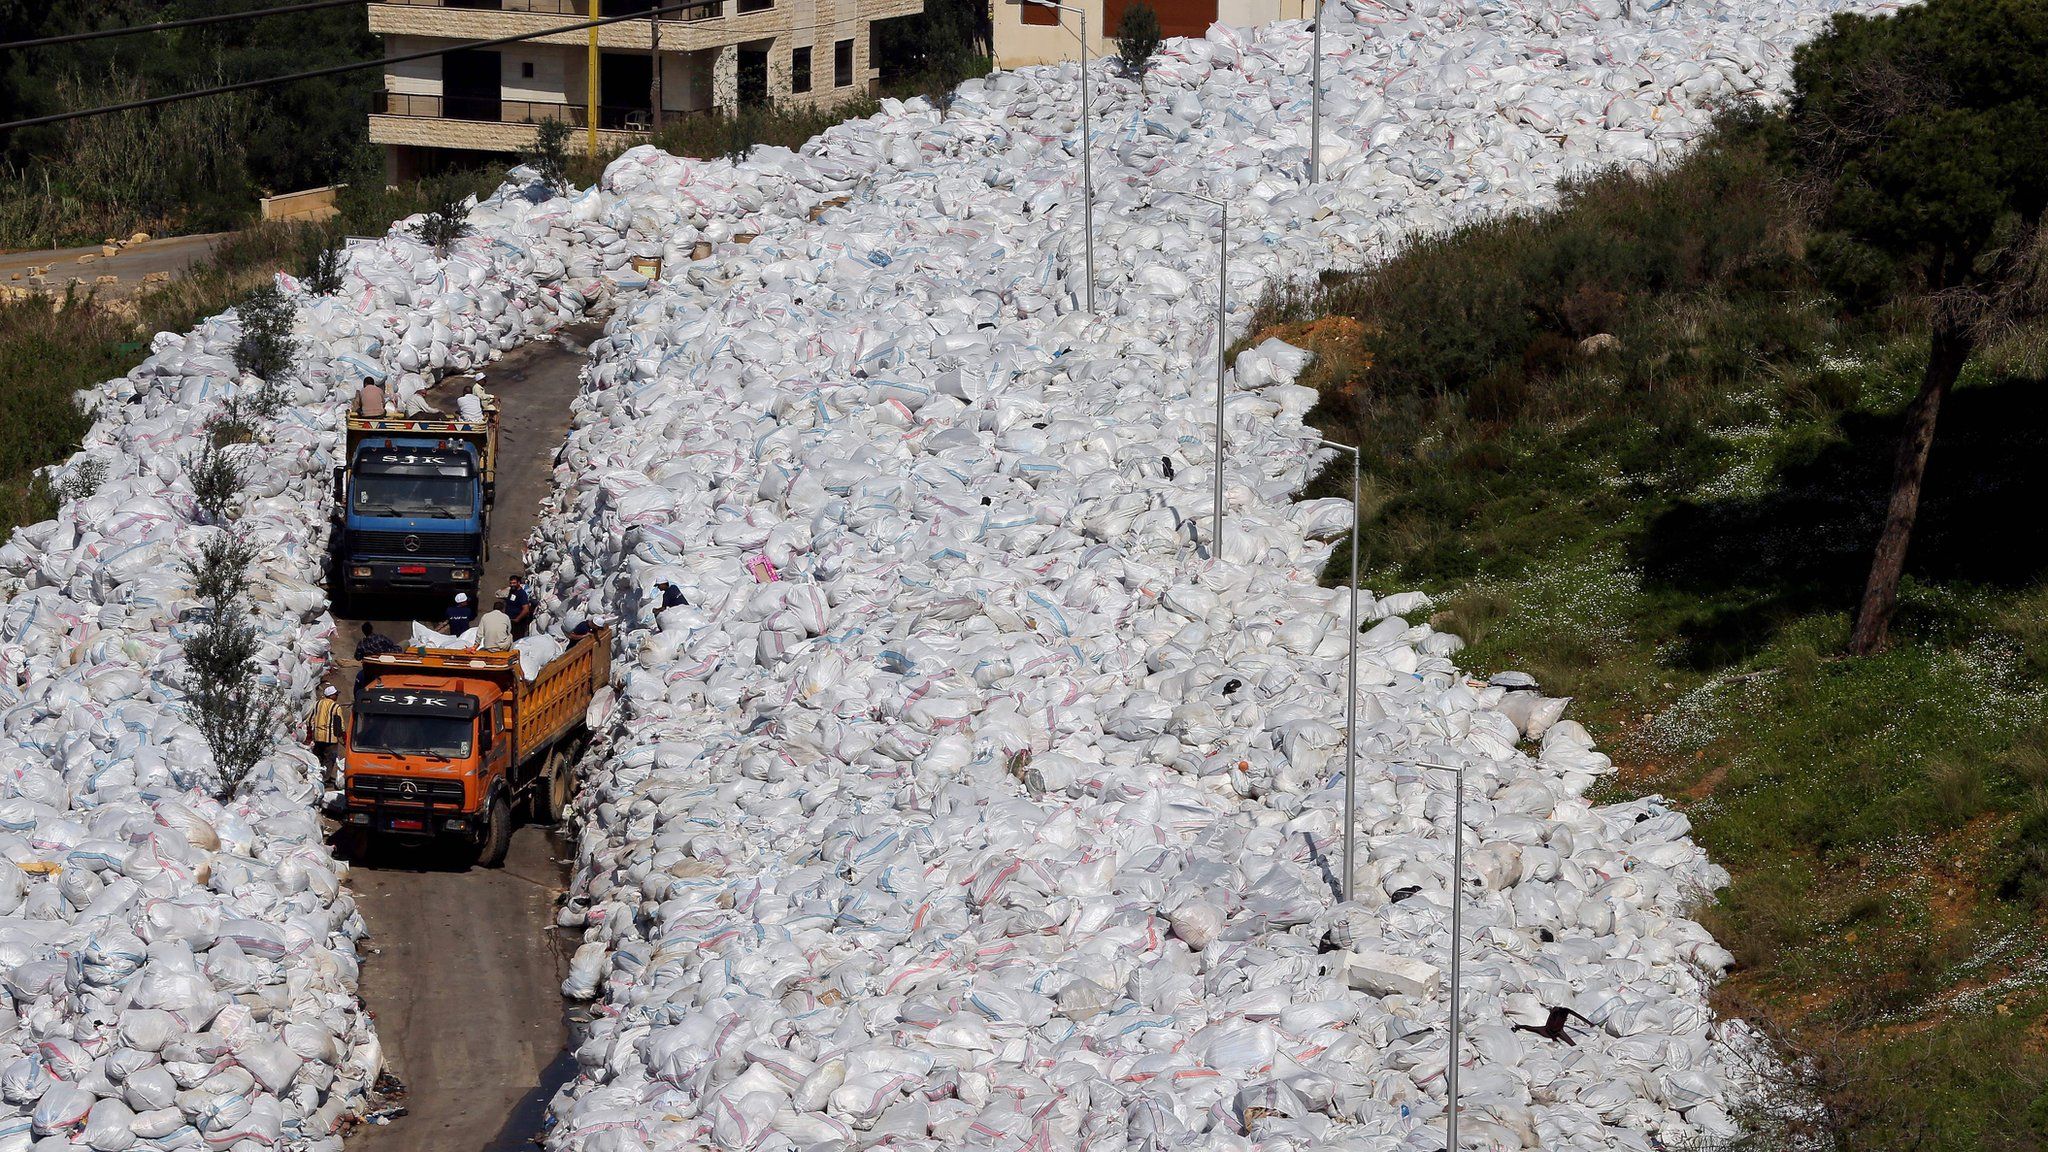 Waste on a street in Beirut's northern suburb of Jdeideh on February 25, 2016.